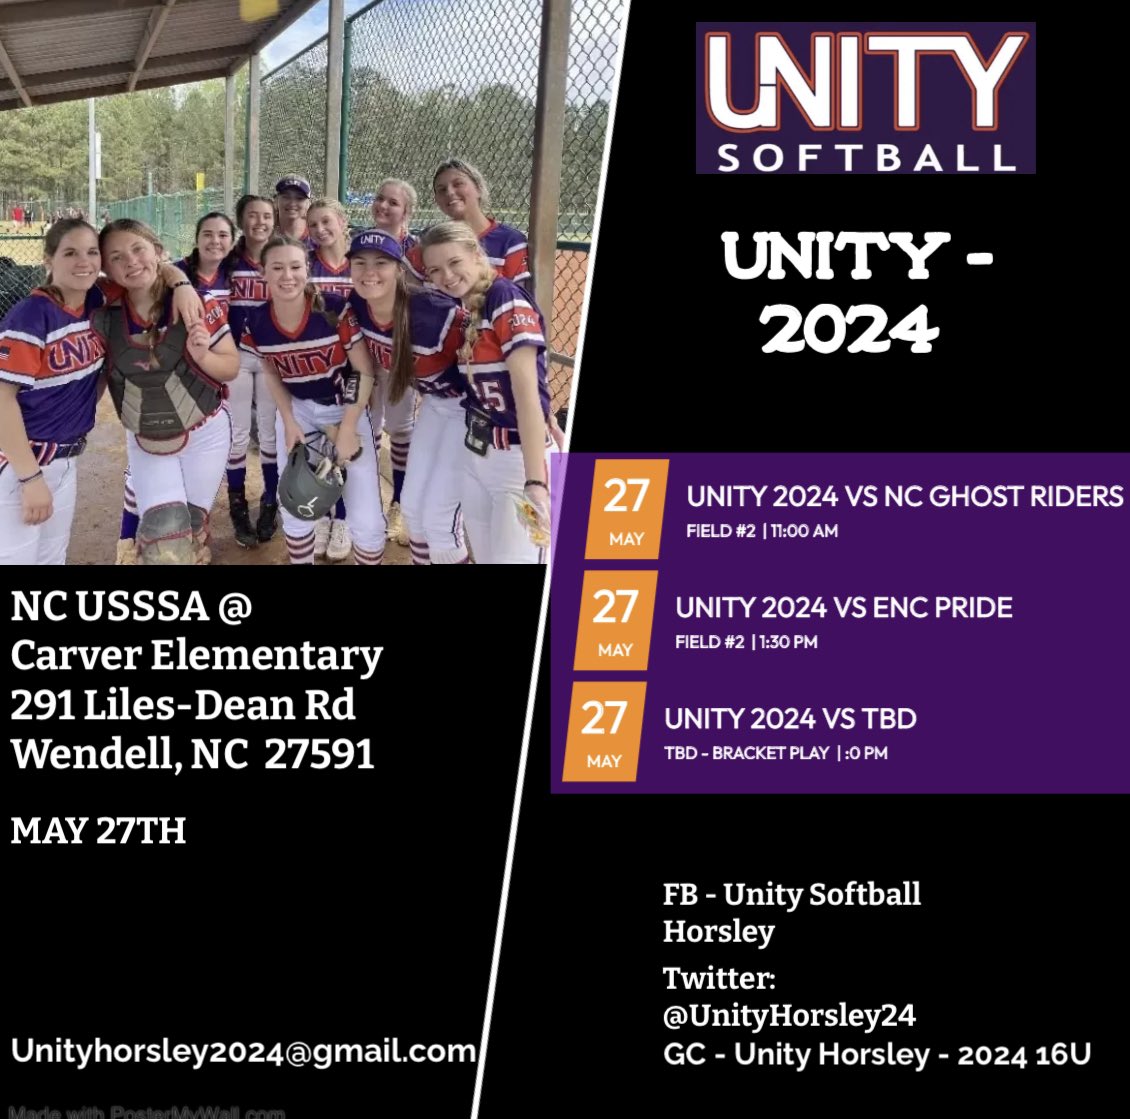 Girls will be back on the field this weekend!  Come out and see these talented ladies play OR catch the live stream. @dixson_erin @KellaGoins @CoachCButler @Coach_M_Booth @UMO_CoachLuke @CoachFuller7 @_Coach_Alex_ @todell04 @slis23 @CoachKayleigh20 @AshleyErcolano @kyleighmpayne